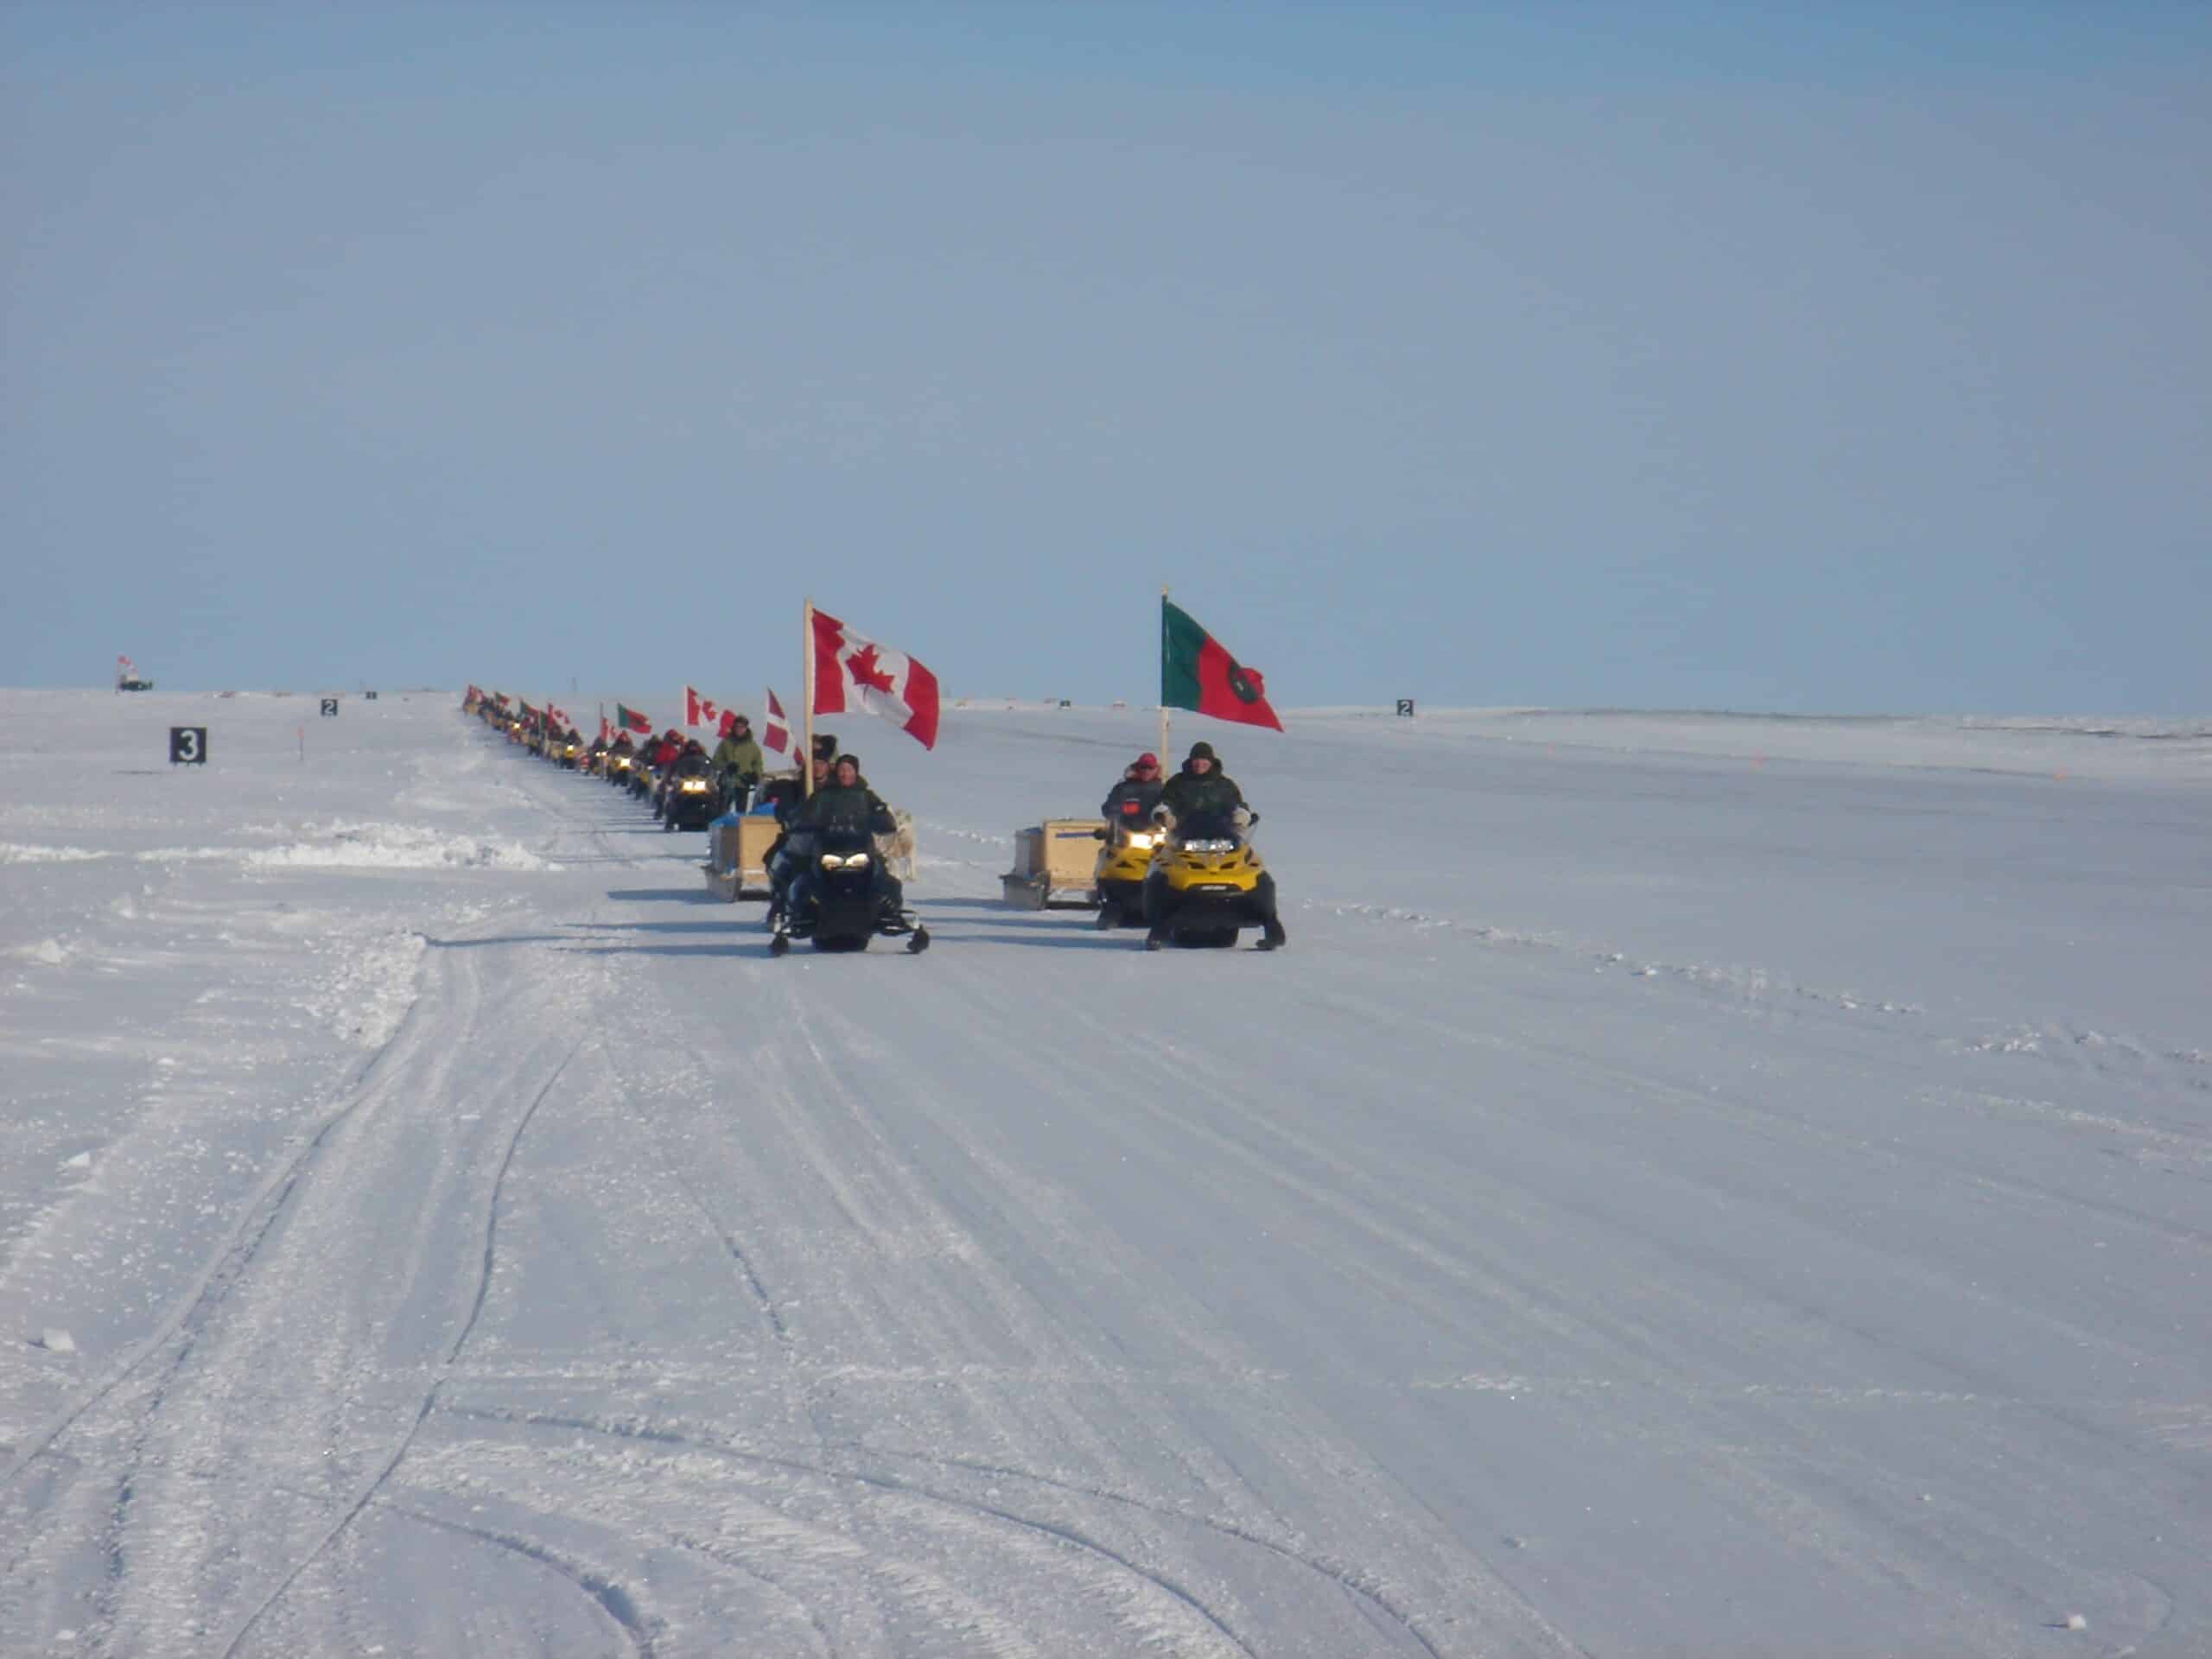 Canadian soldiers ride snowmobiles during a training exercise in Nunavut